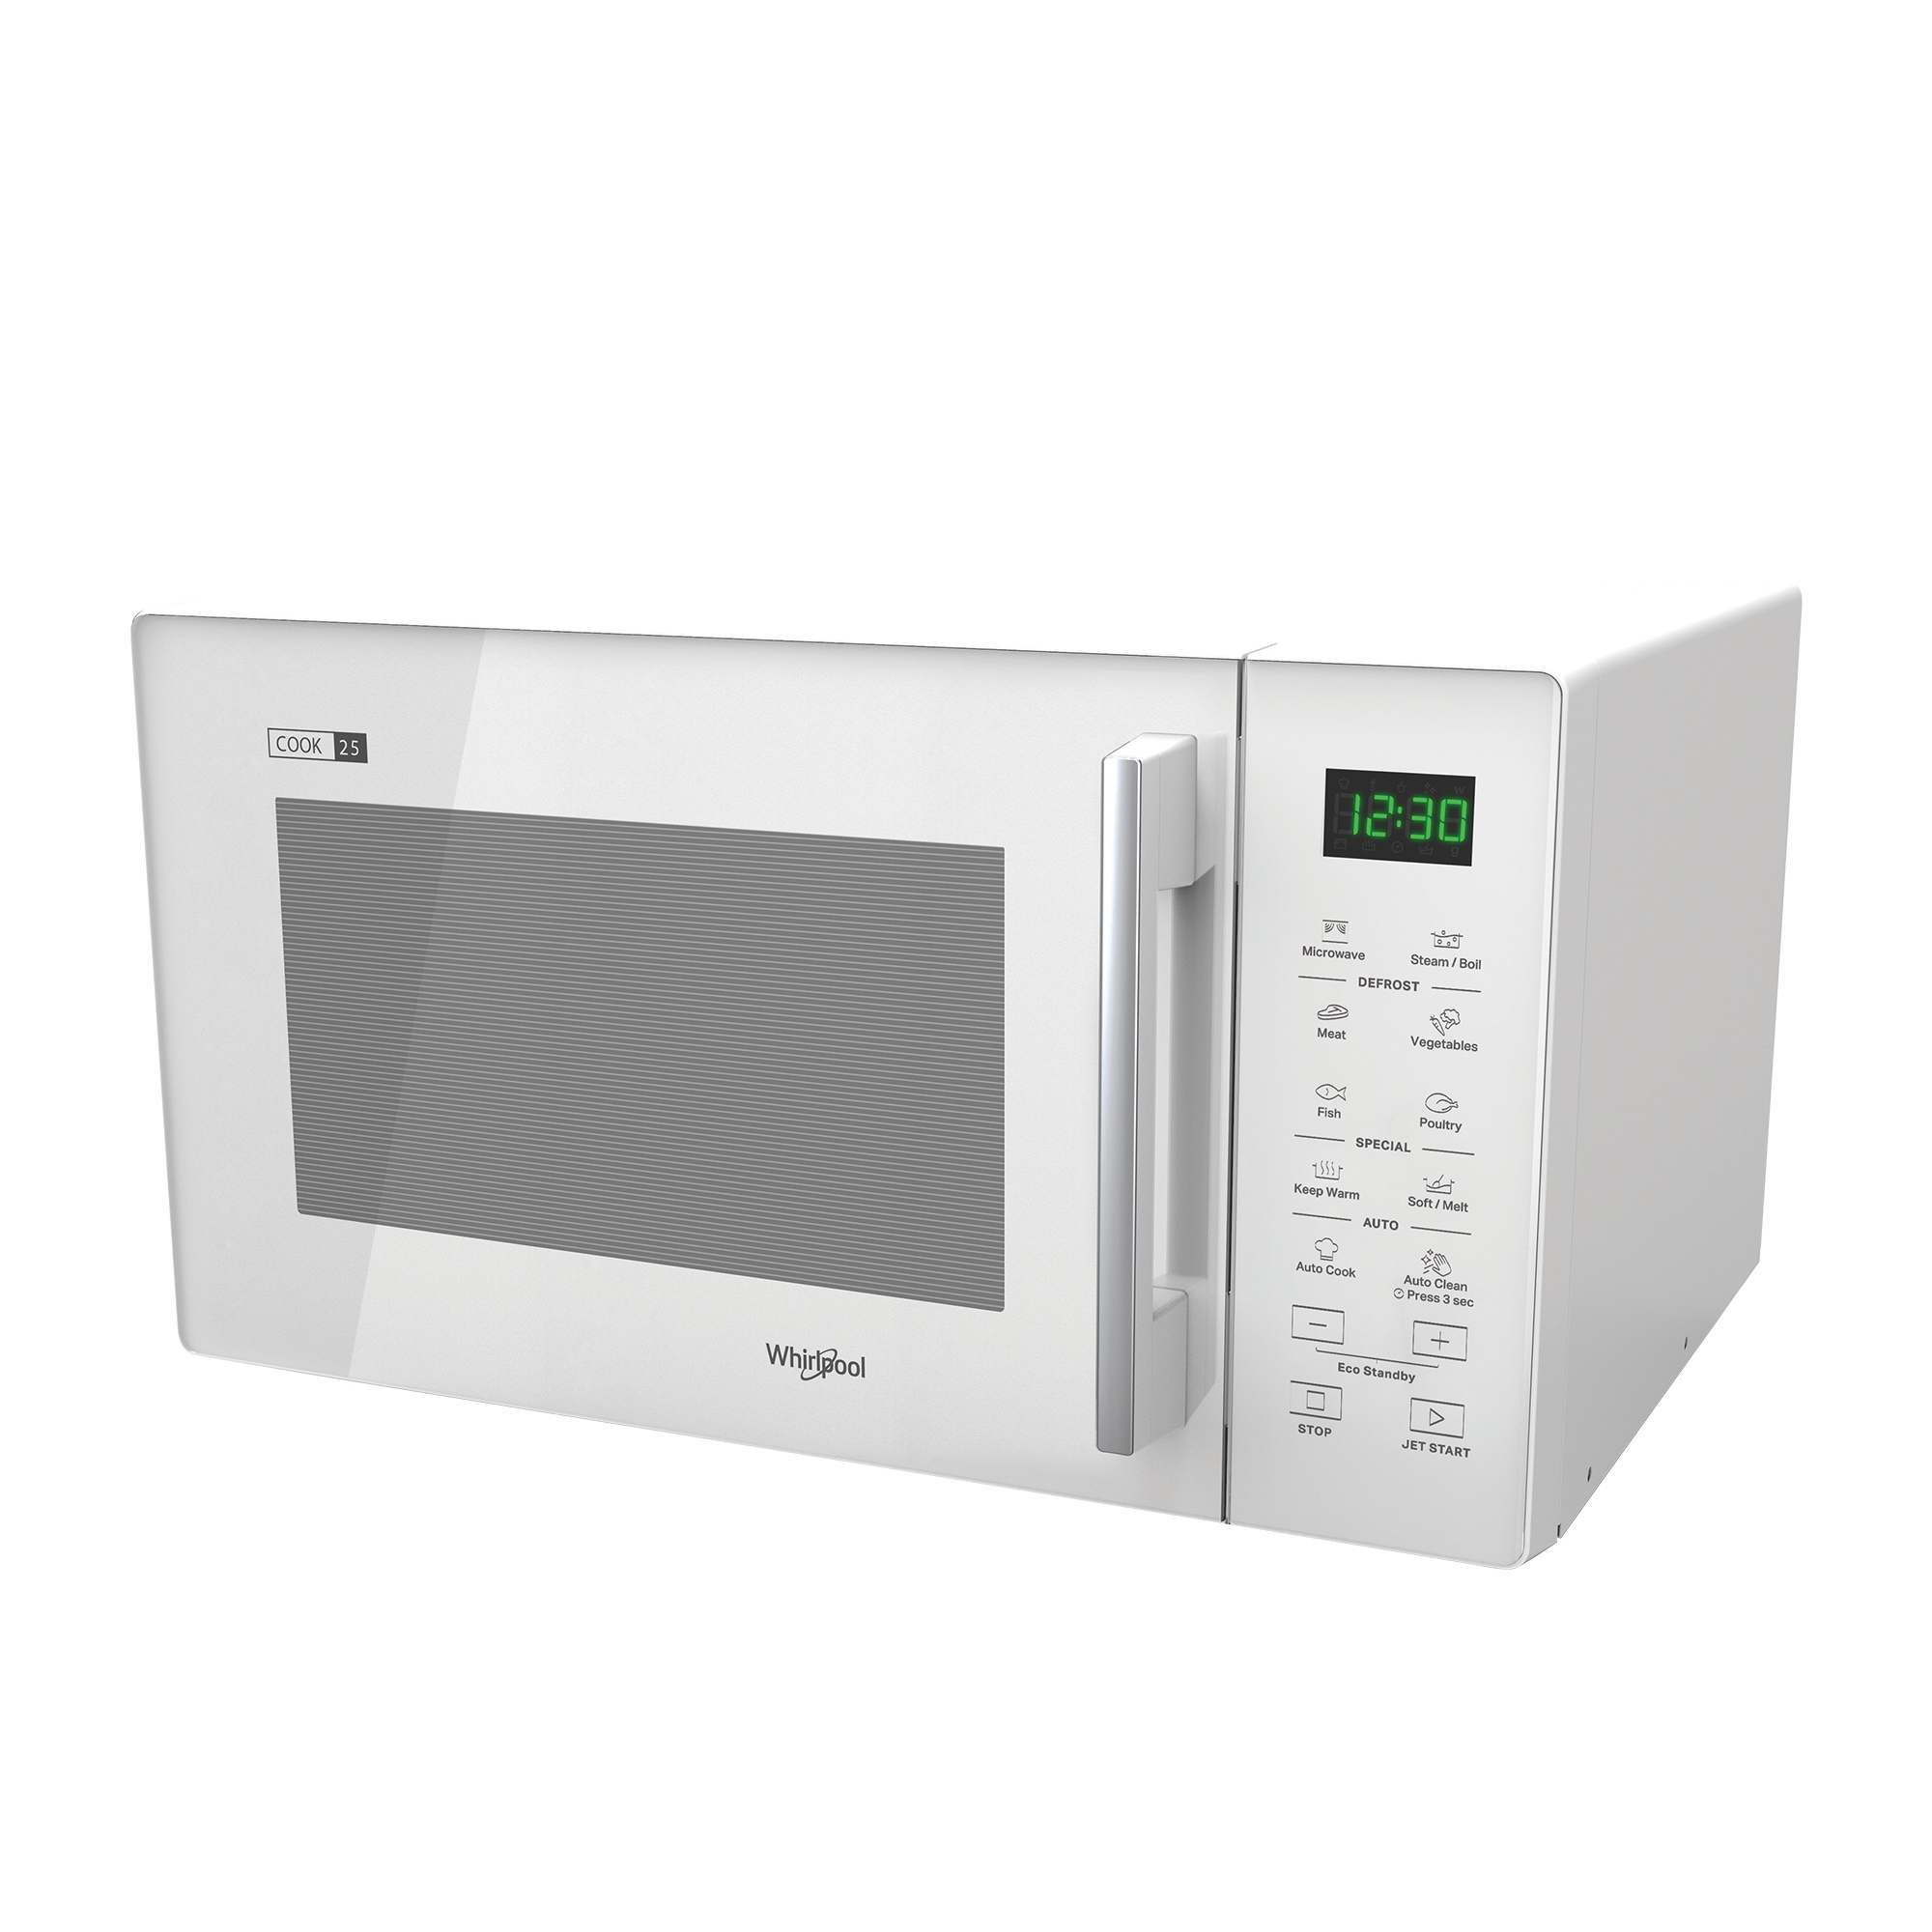 Whirlpool Microwave Oven 25L White Image 1